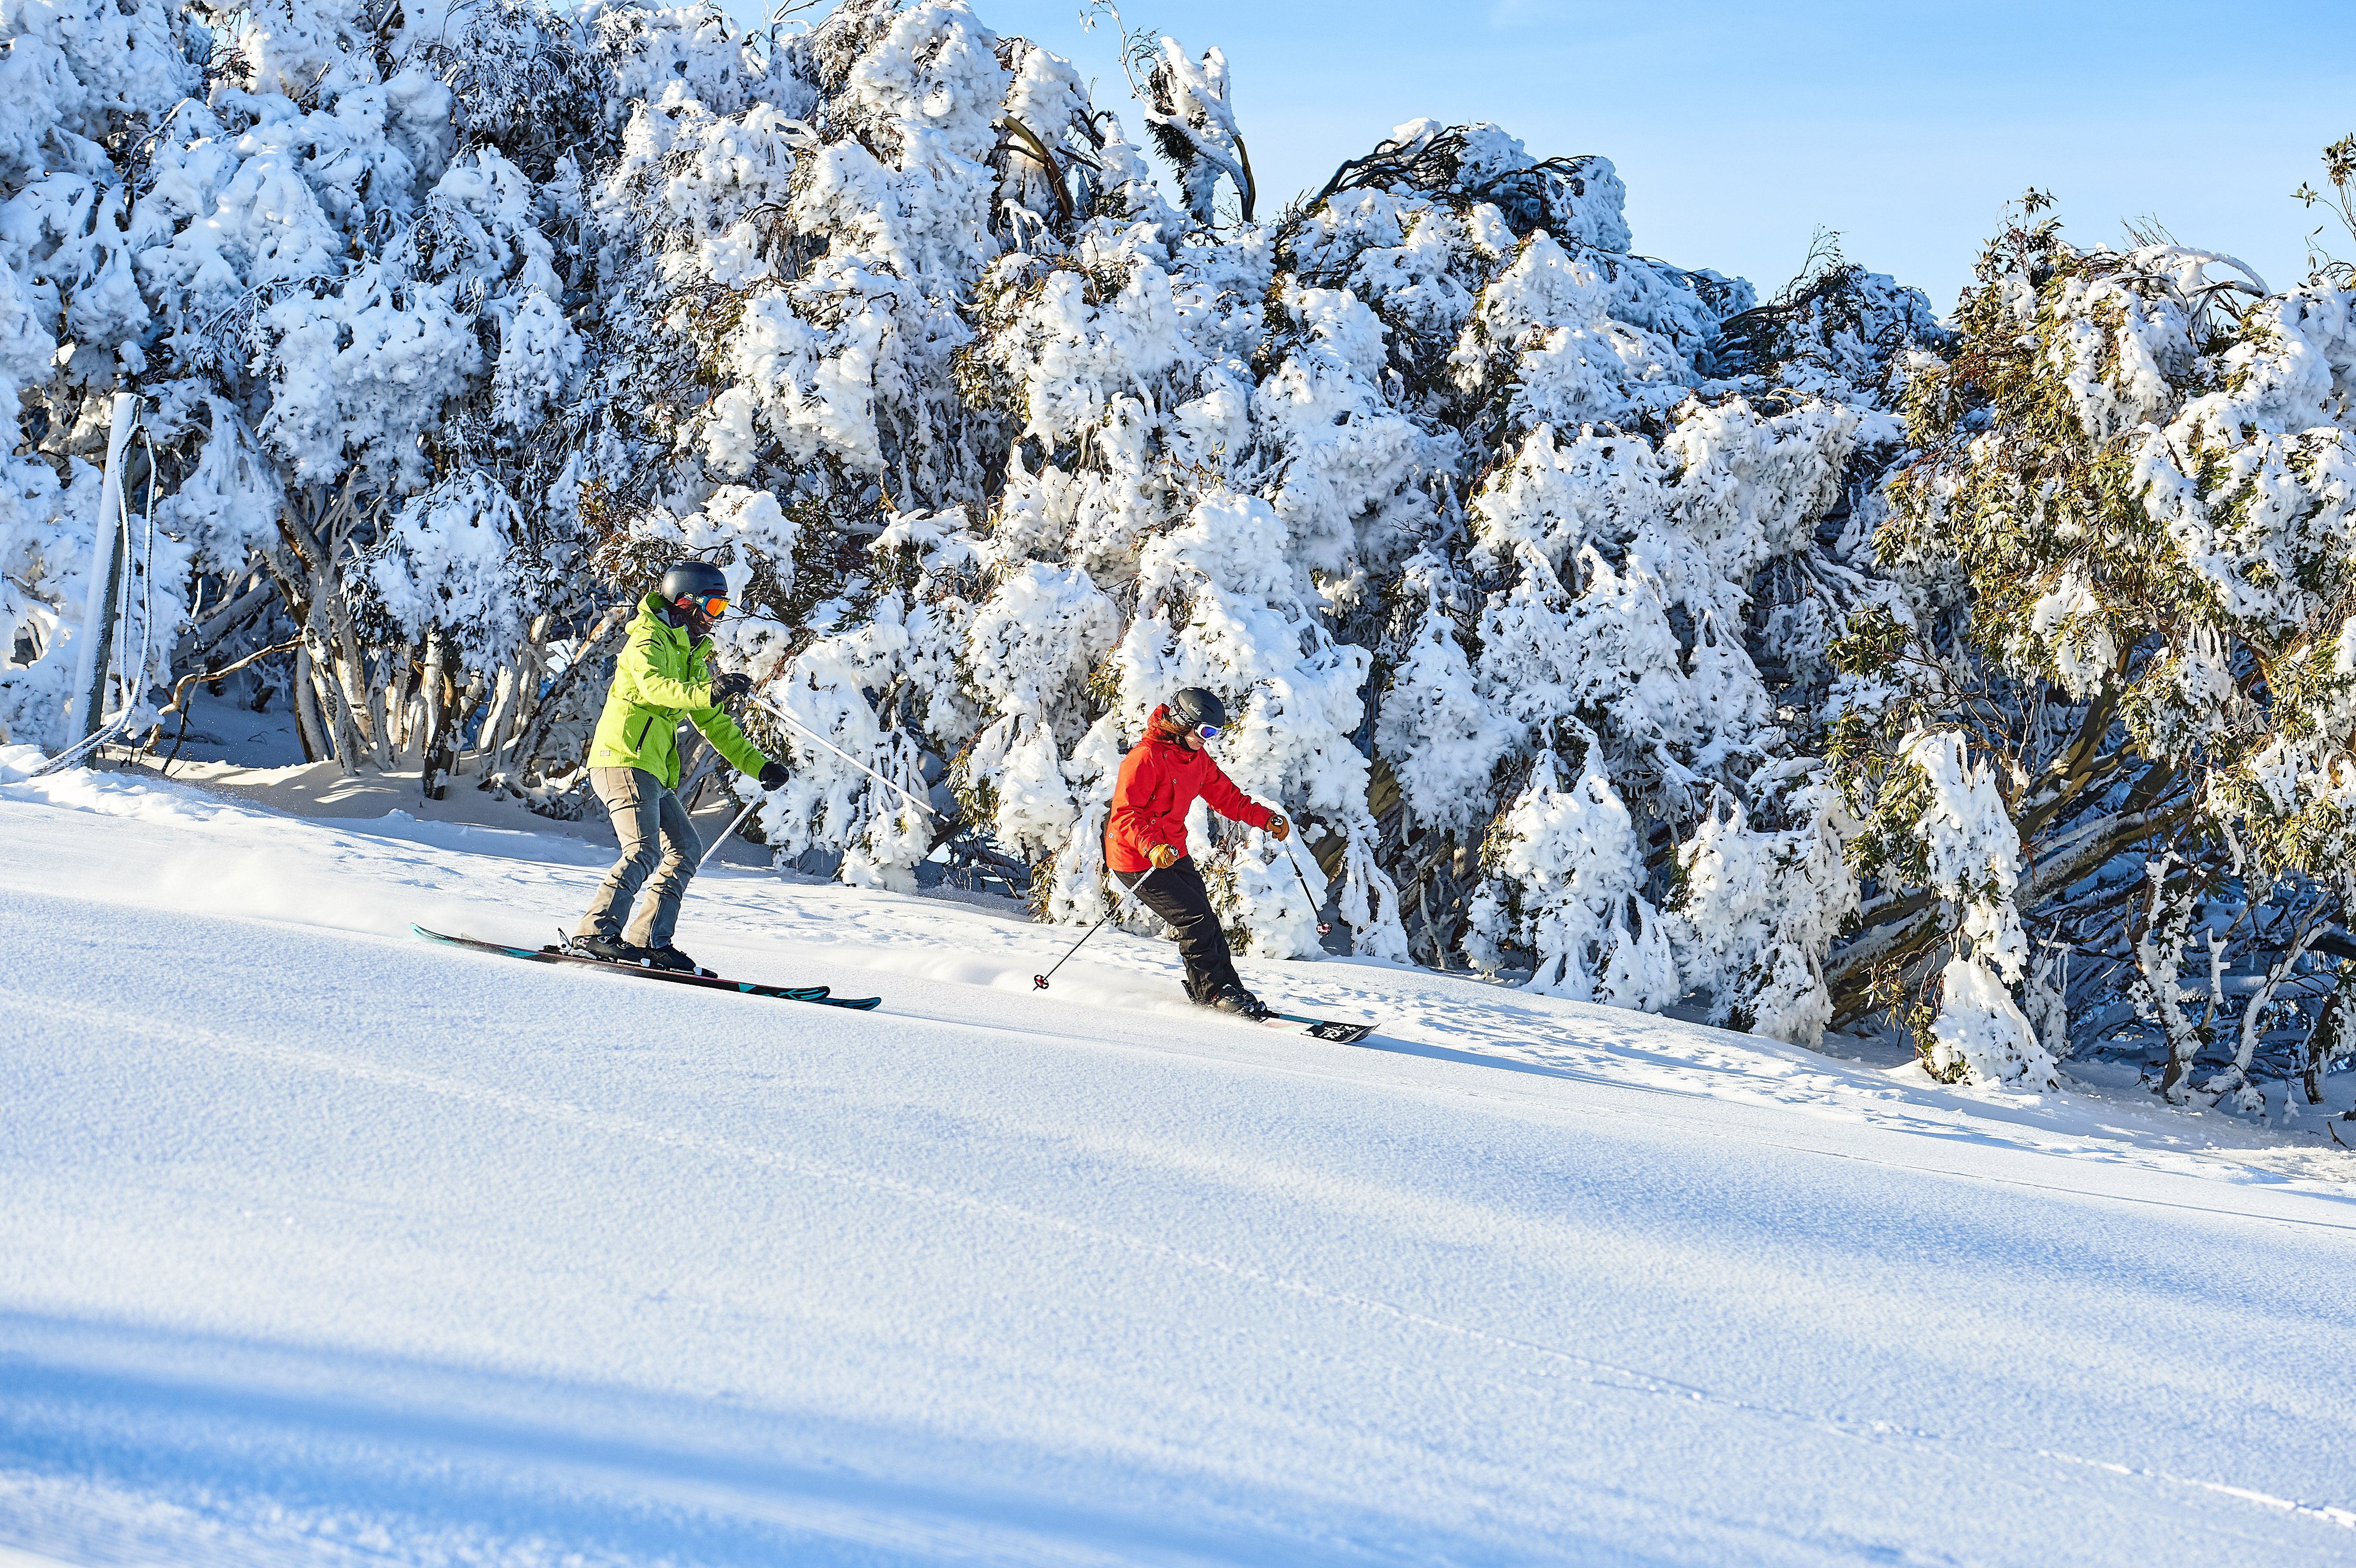 Season Members enjoy unlimited days on the slopes all winter